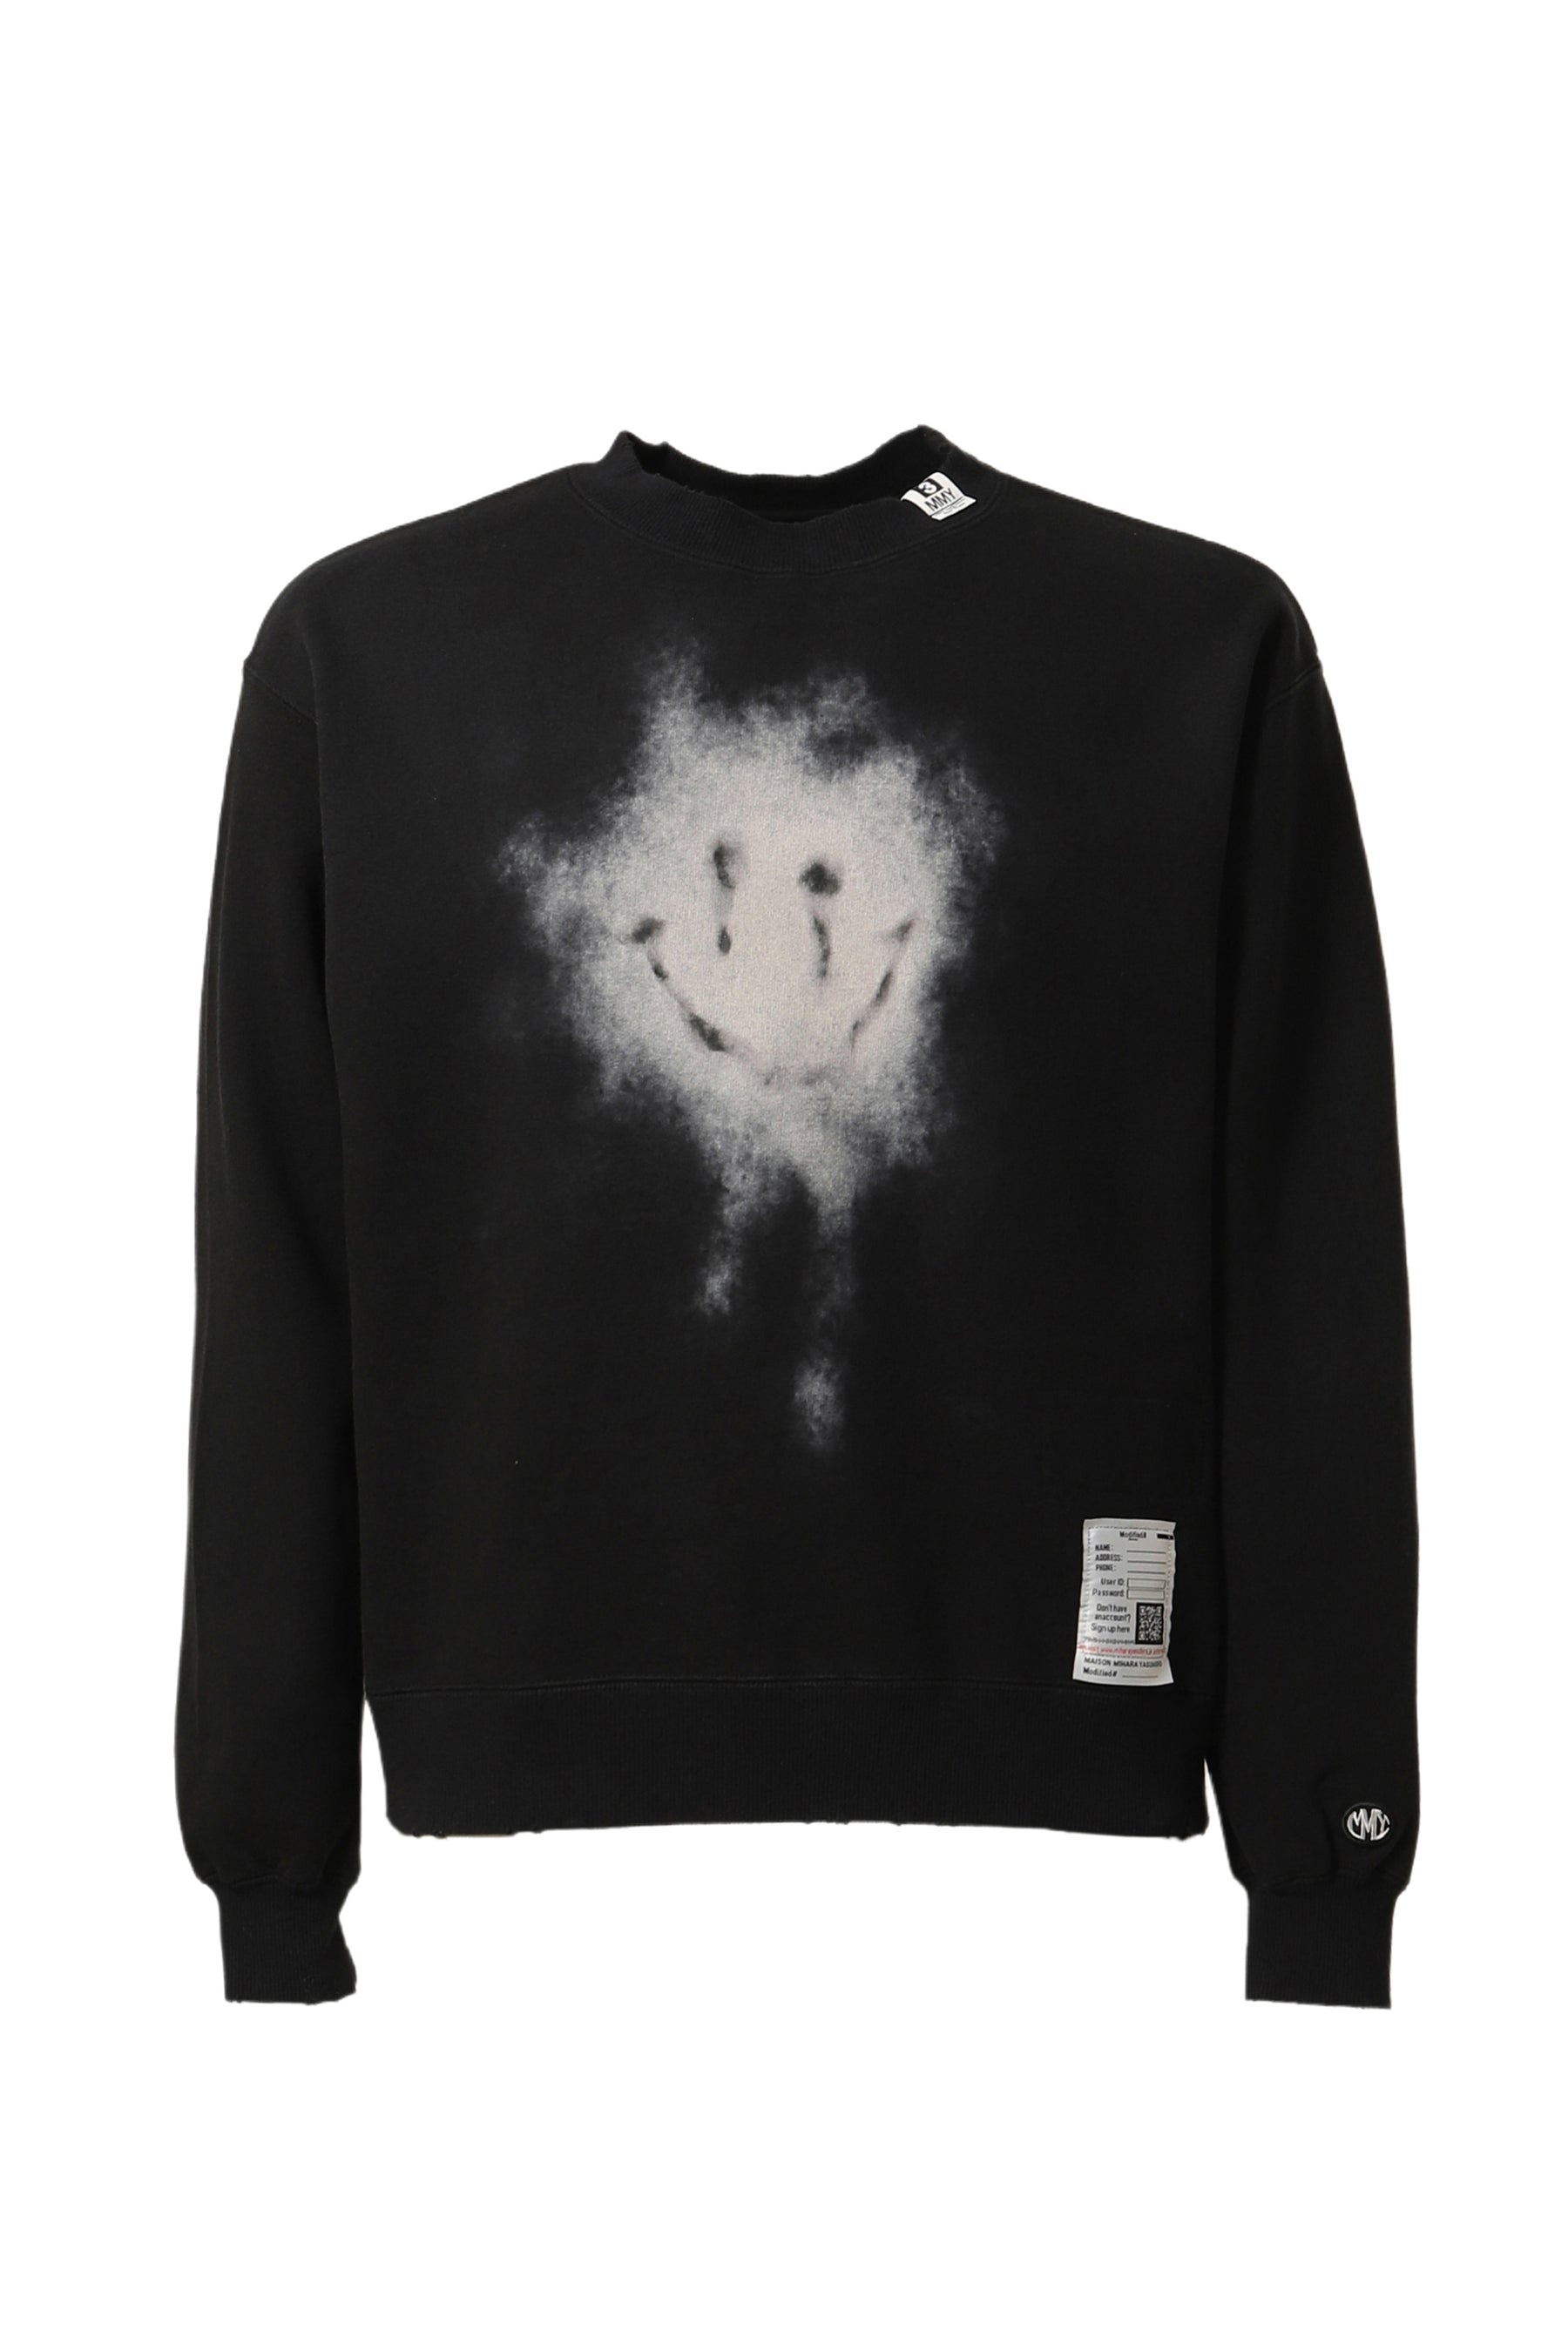 DISTRESSED SMILY FACE PT PULLOVER / BLK - 1